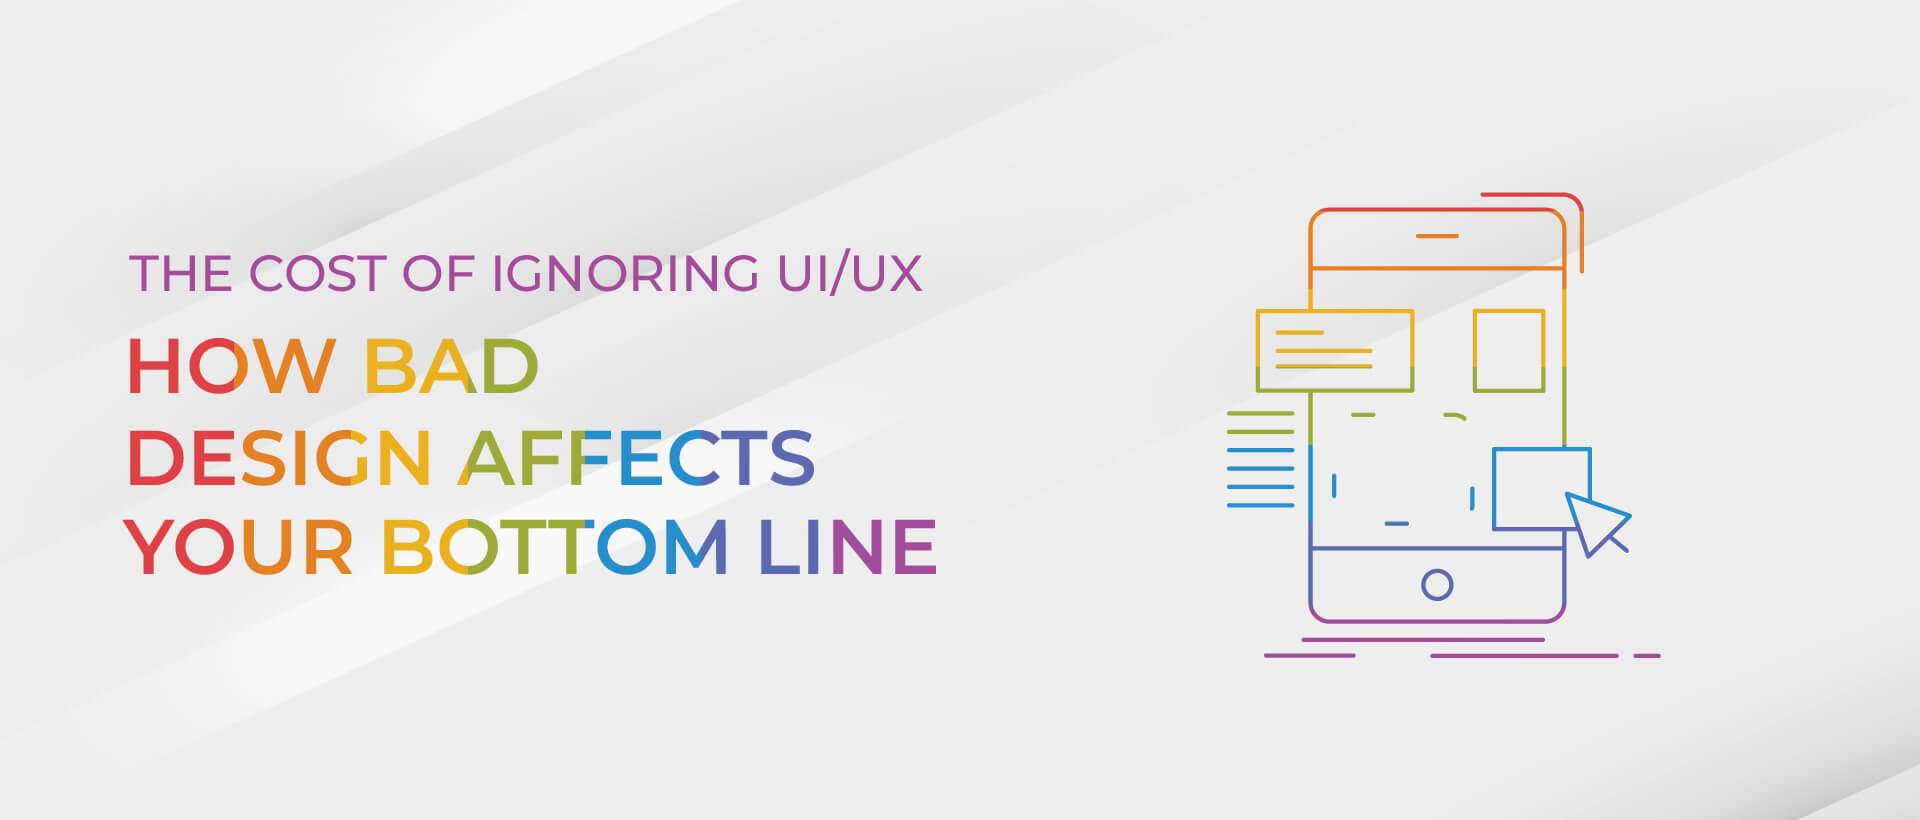 The Cost of Ignoring UI/UX: How Bad Design Affects Your Bottom Line